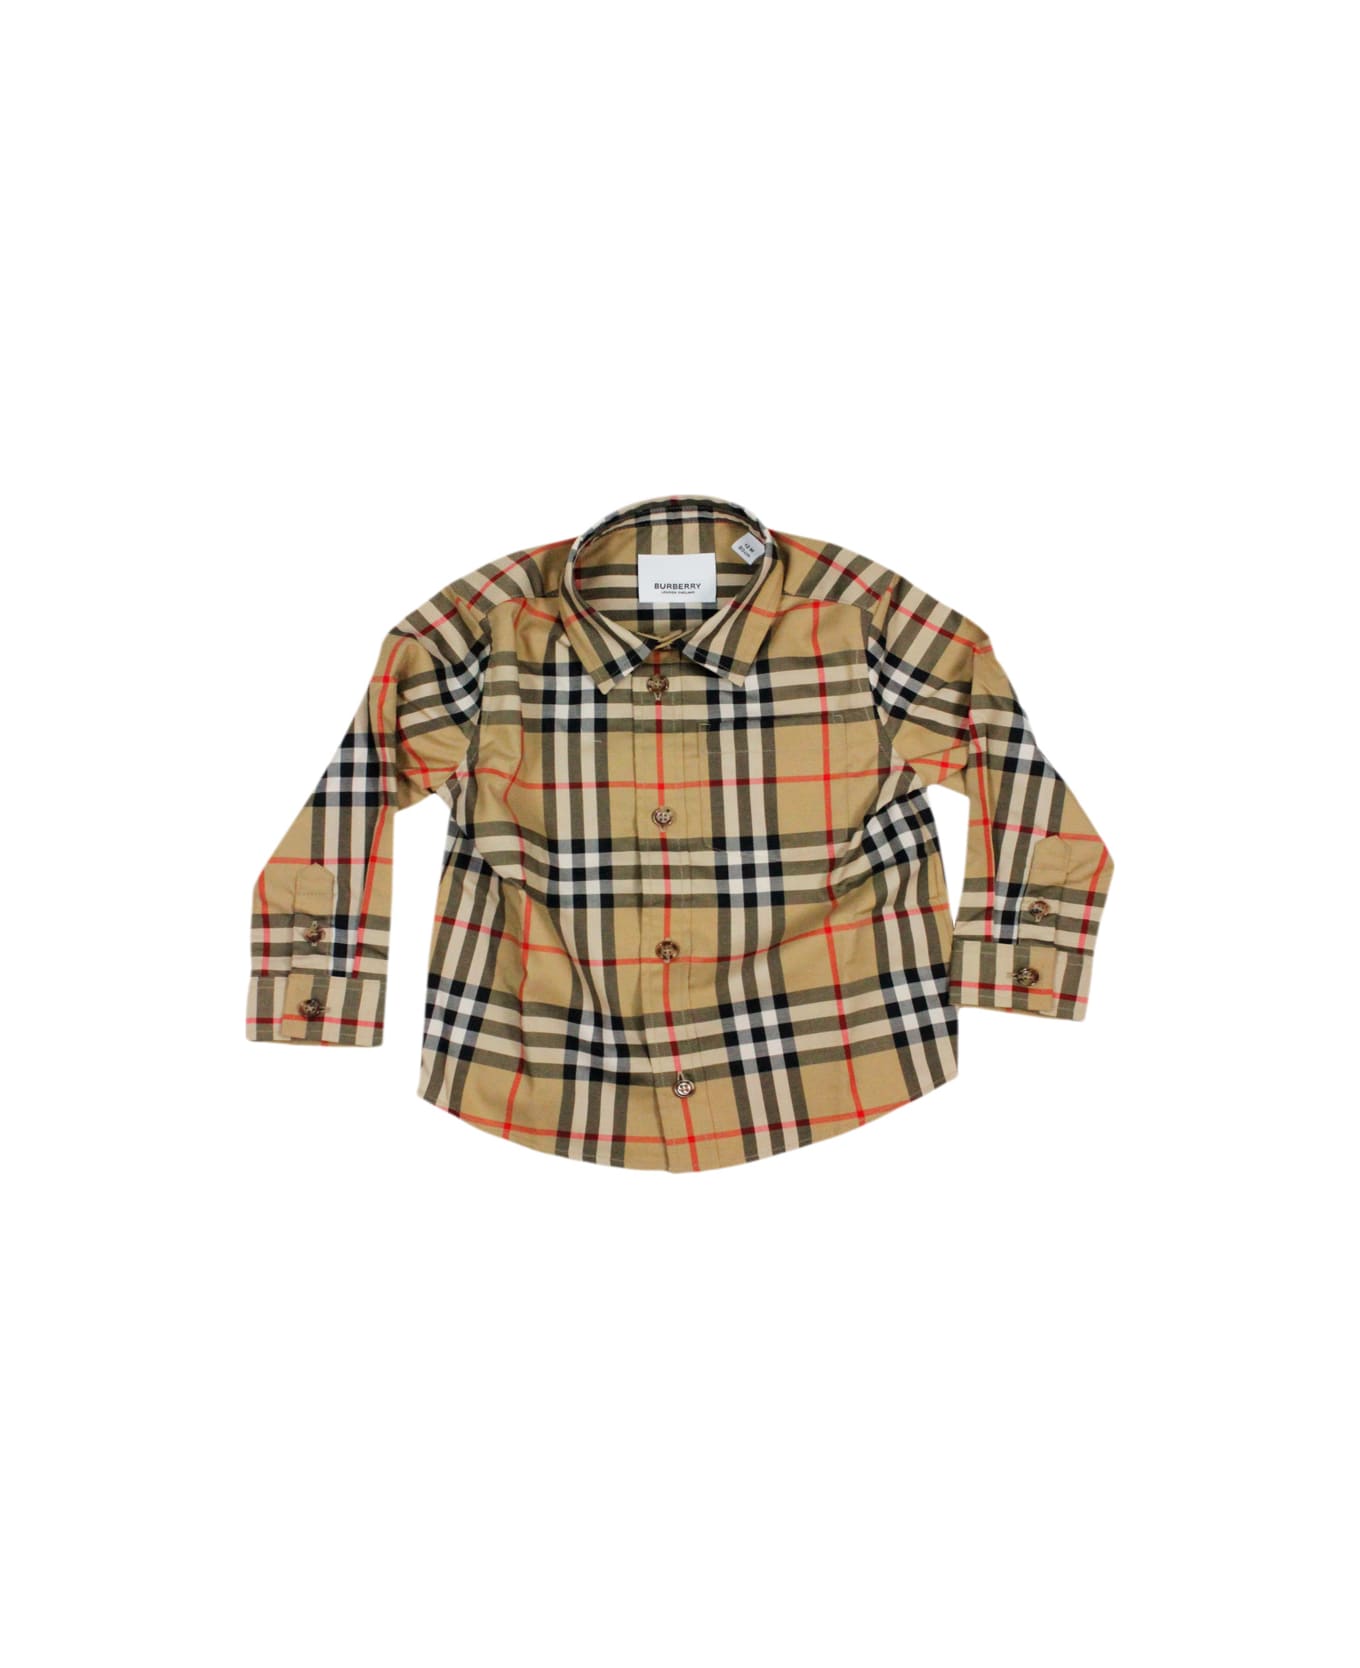 Burberry Stretch Cotton Twill Shirt With Patch Pocket On The Chest In A Vintage Check Pattern - Beige シャツ